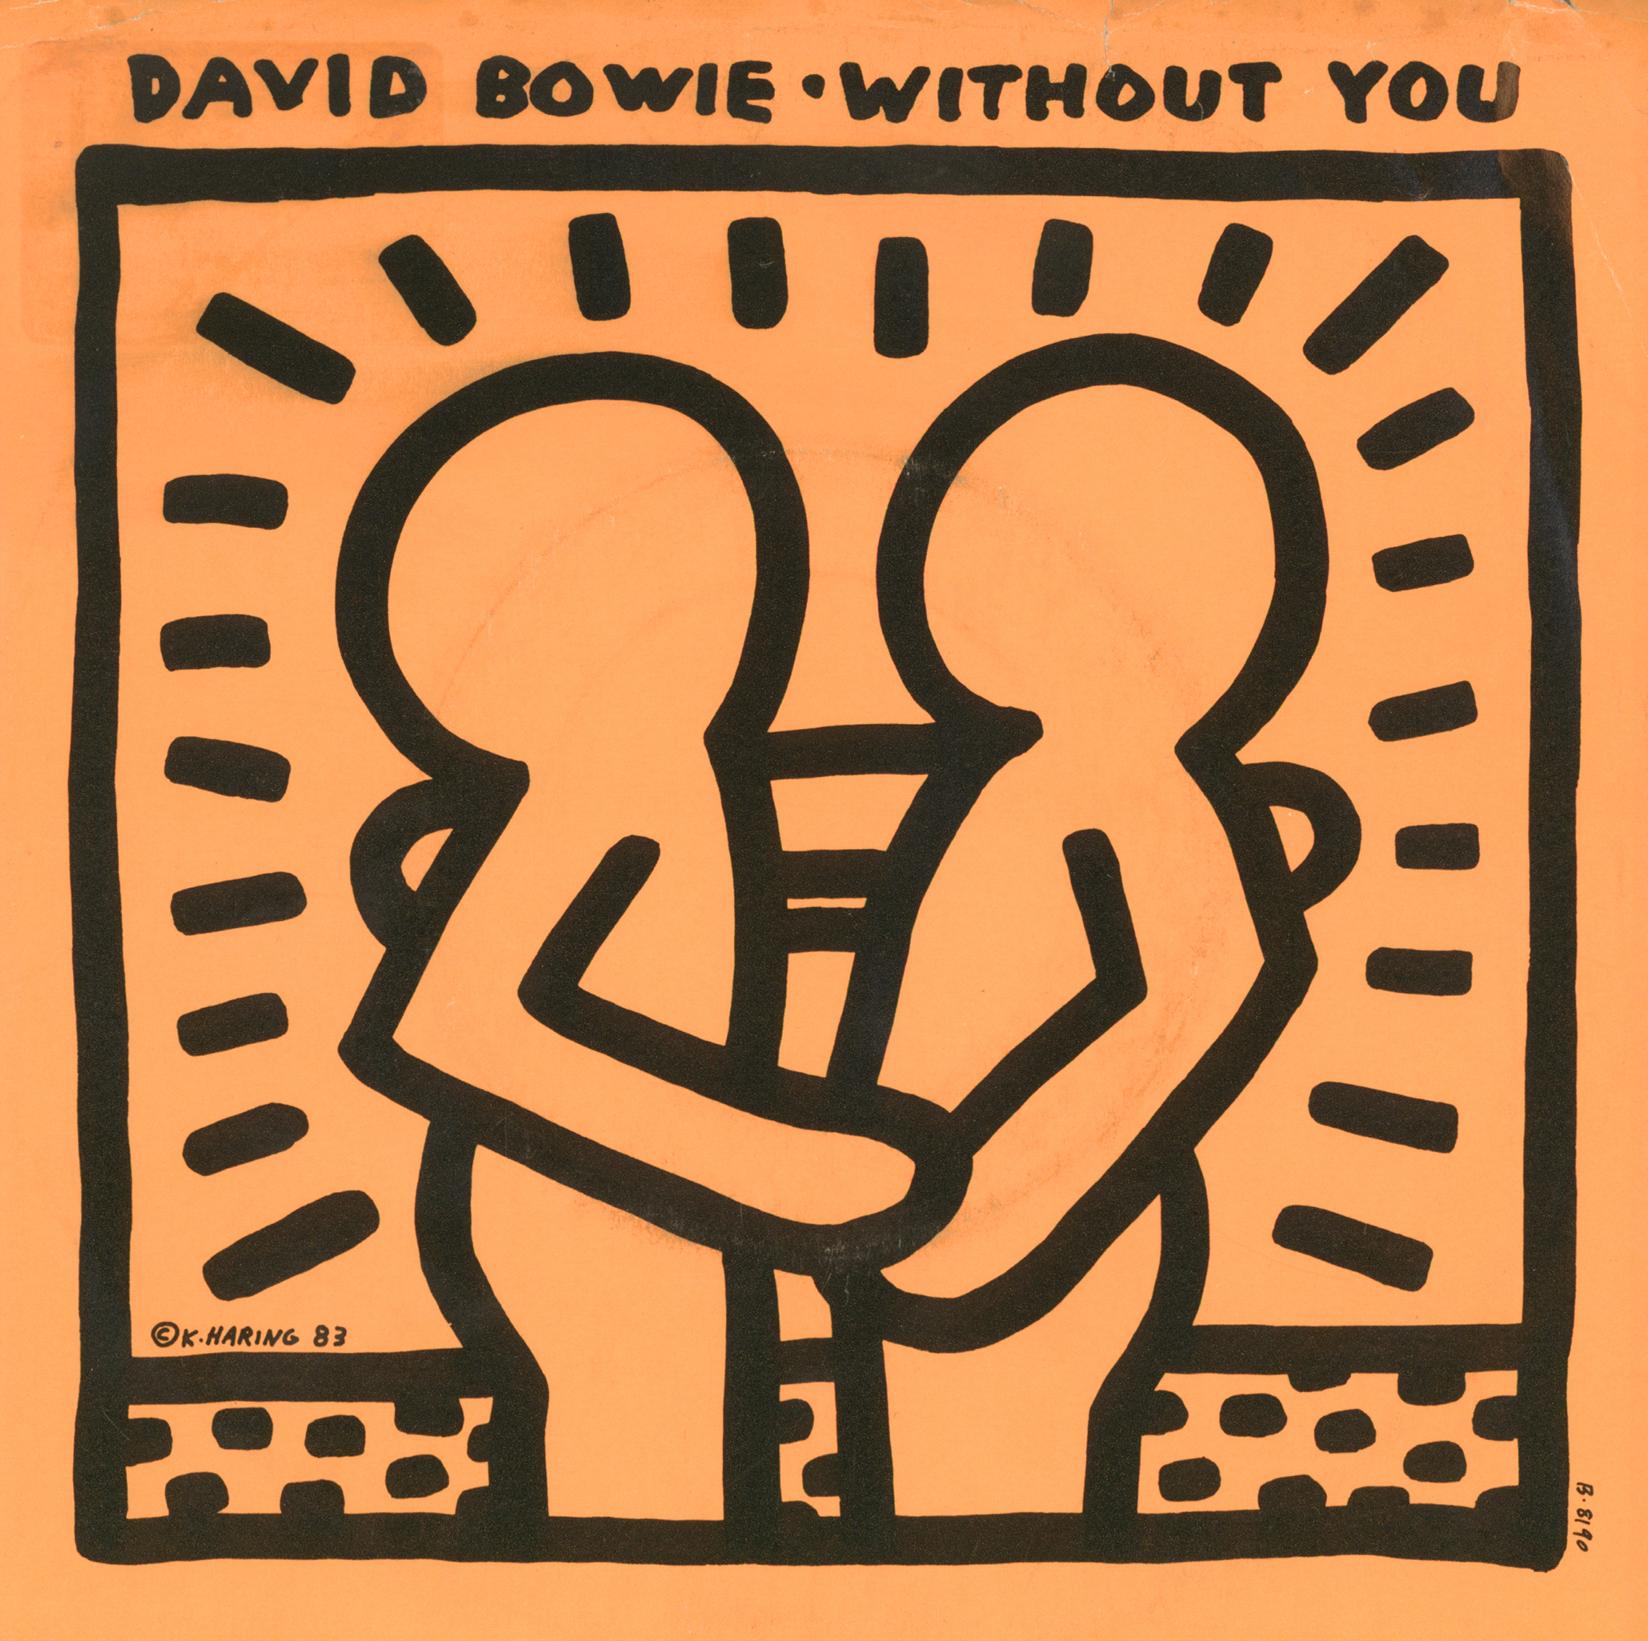 1980s Keith Haring Record Art:
David BOWIE "Without You" A Rare Highly Sought After Vinyl Art Cover featuring original cover artwork by Keith Haring.

Year: 1983.

Medium: Off-Set Lithograph.

Dimensions: 7 x 7inches; 
Scattered ring & surface wear